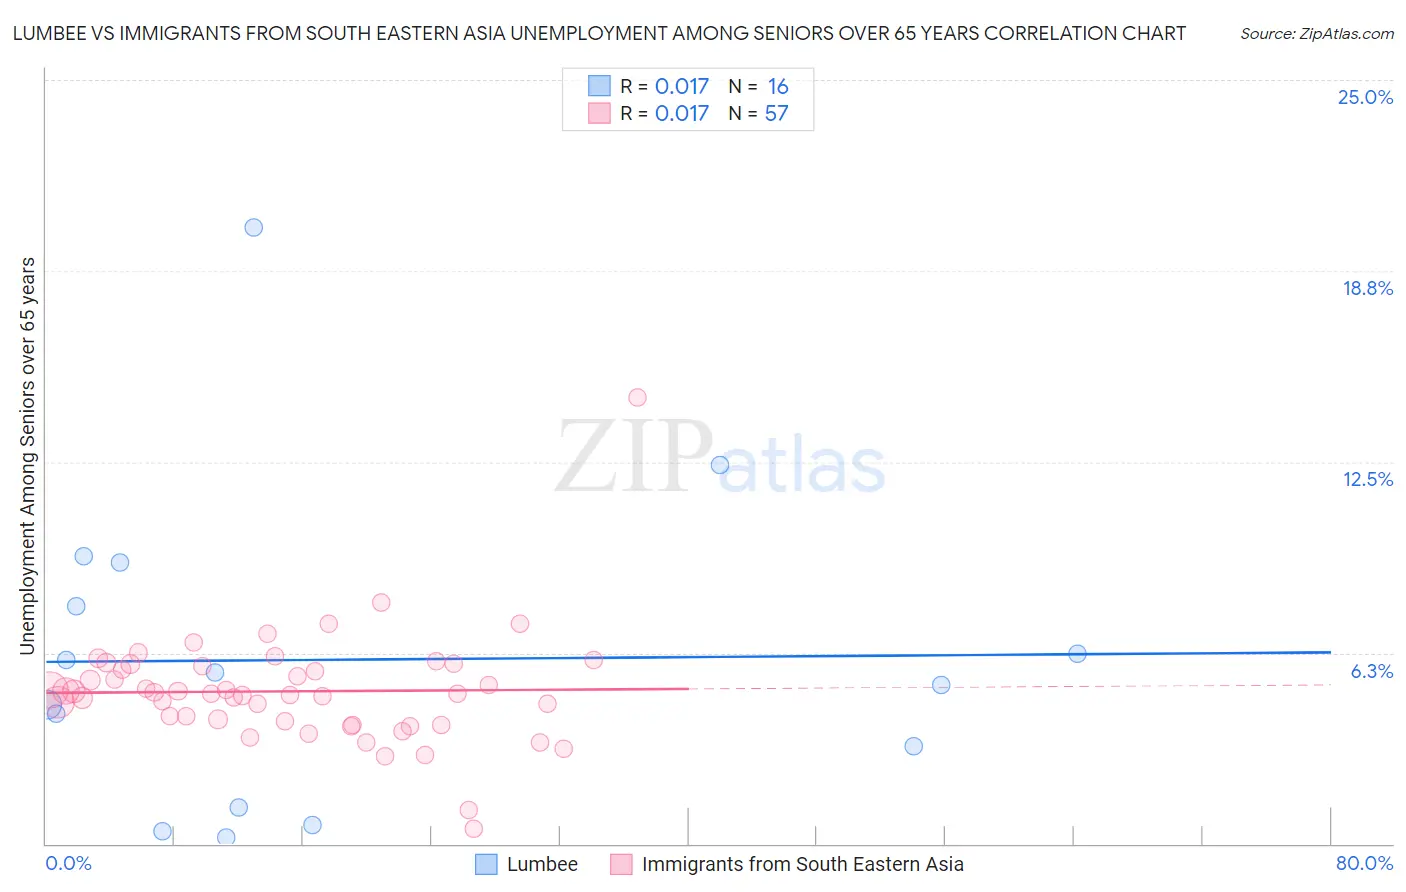 Lumbee vs Immigrants from South Eastern Asia Unemployment Among Seniors over 65 years